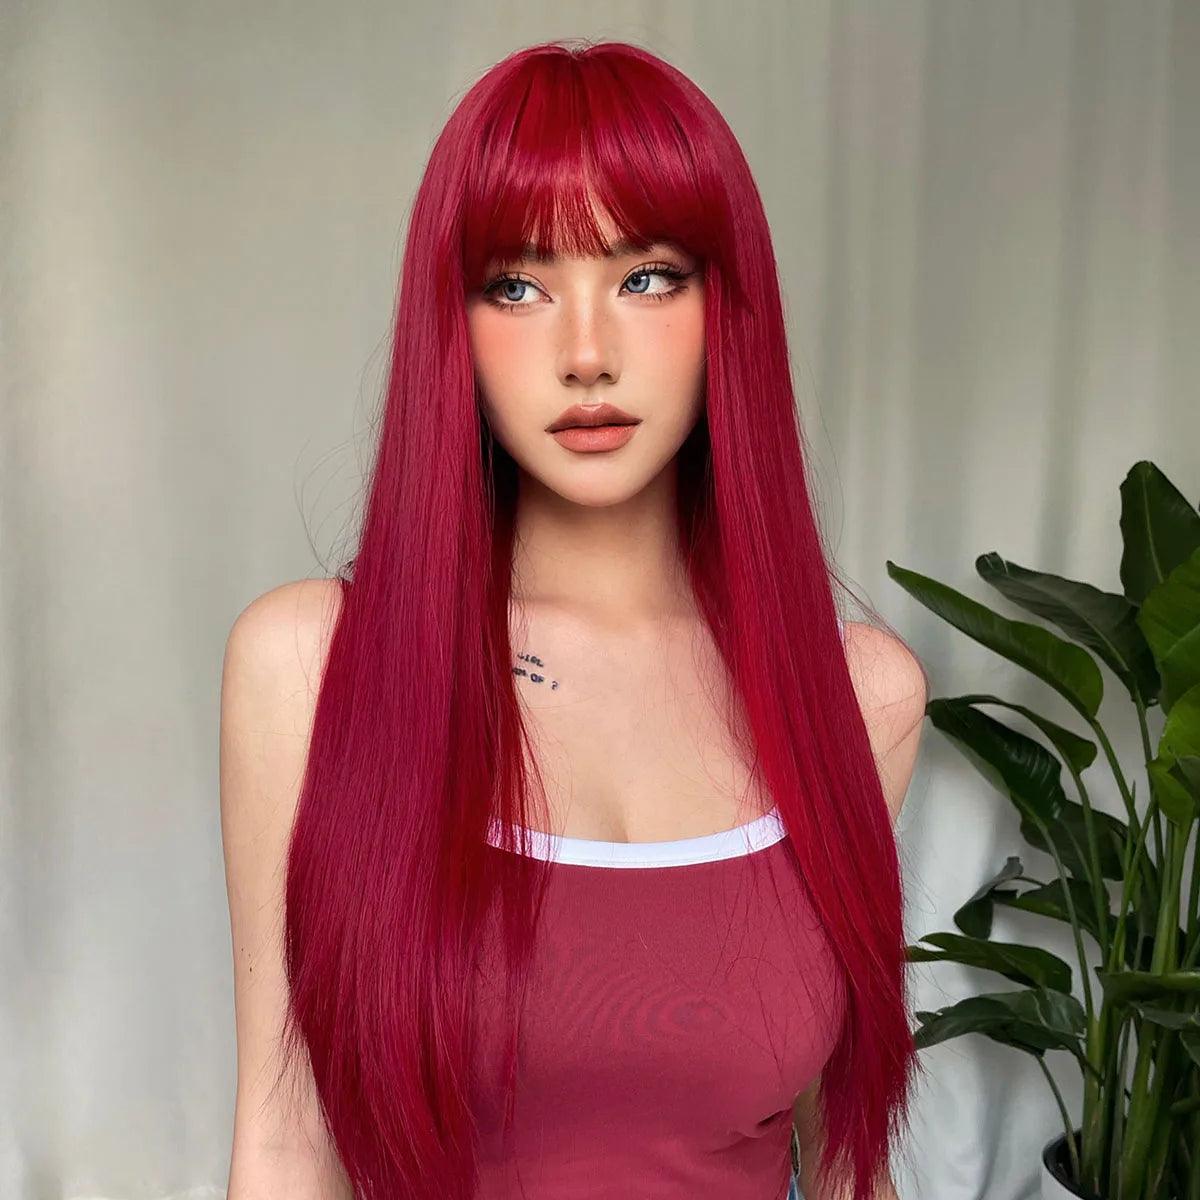 Vibrant Red Synthetic Hair Wig with Bangs - Long Straight Style for Women, Heat Resistant for Cosplay Parties  ourlum.com   